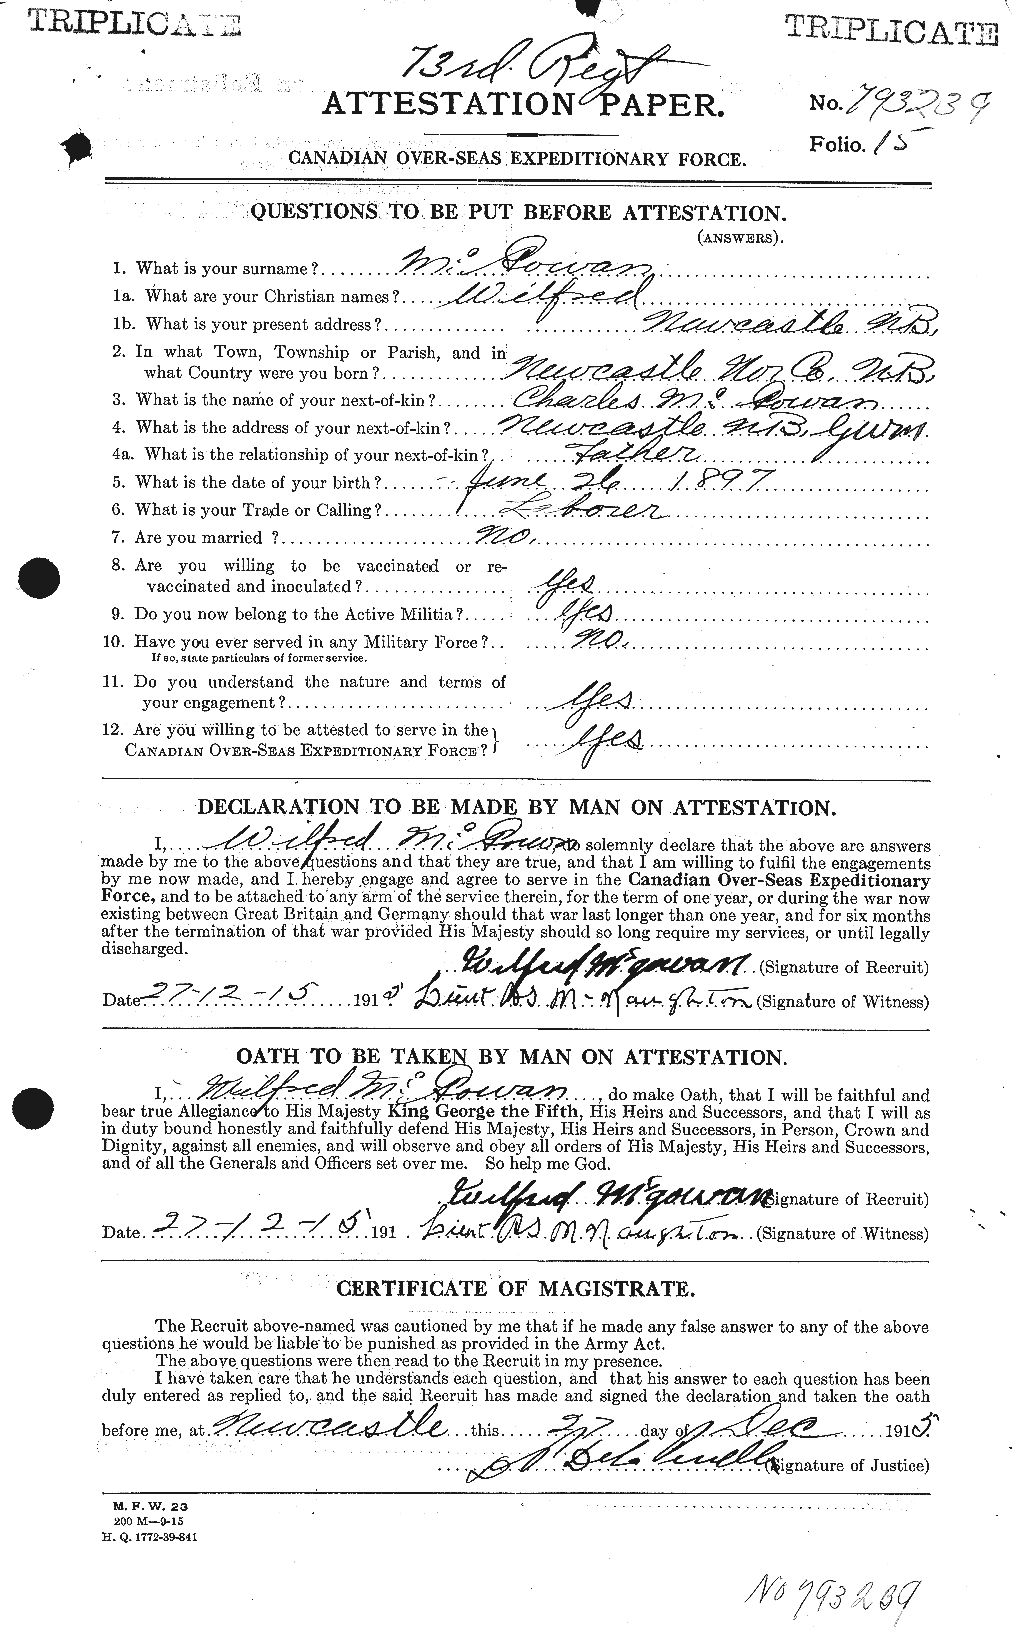 Personnel Records of the First World War - CEF 523228a